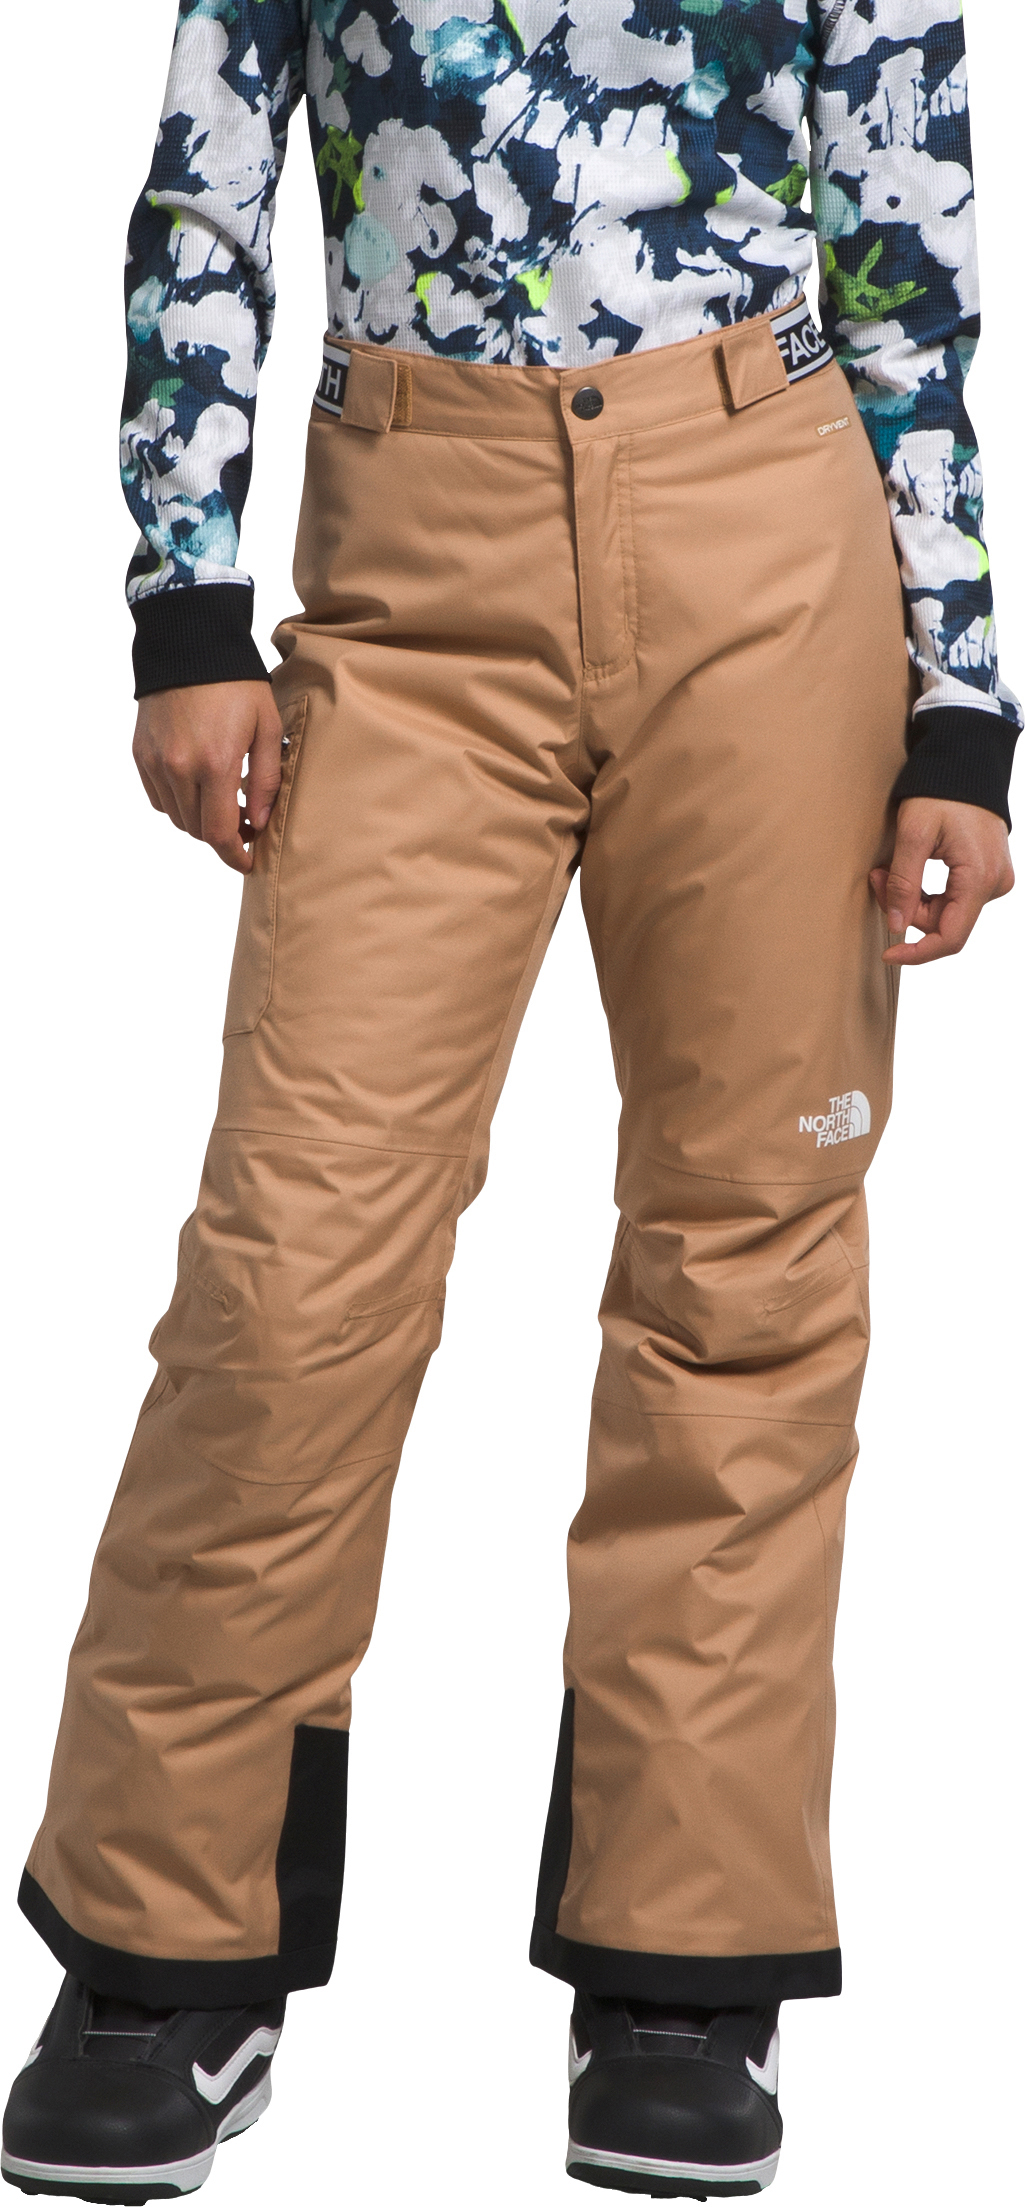 The North Face Freedom Insulated Pants - Girls' - Children to Youths